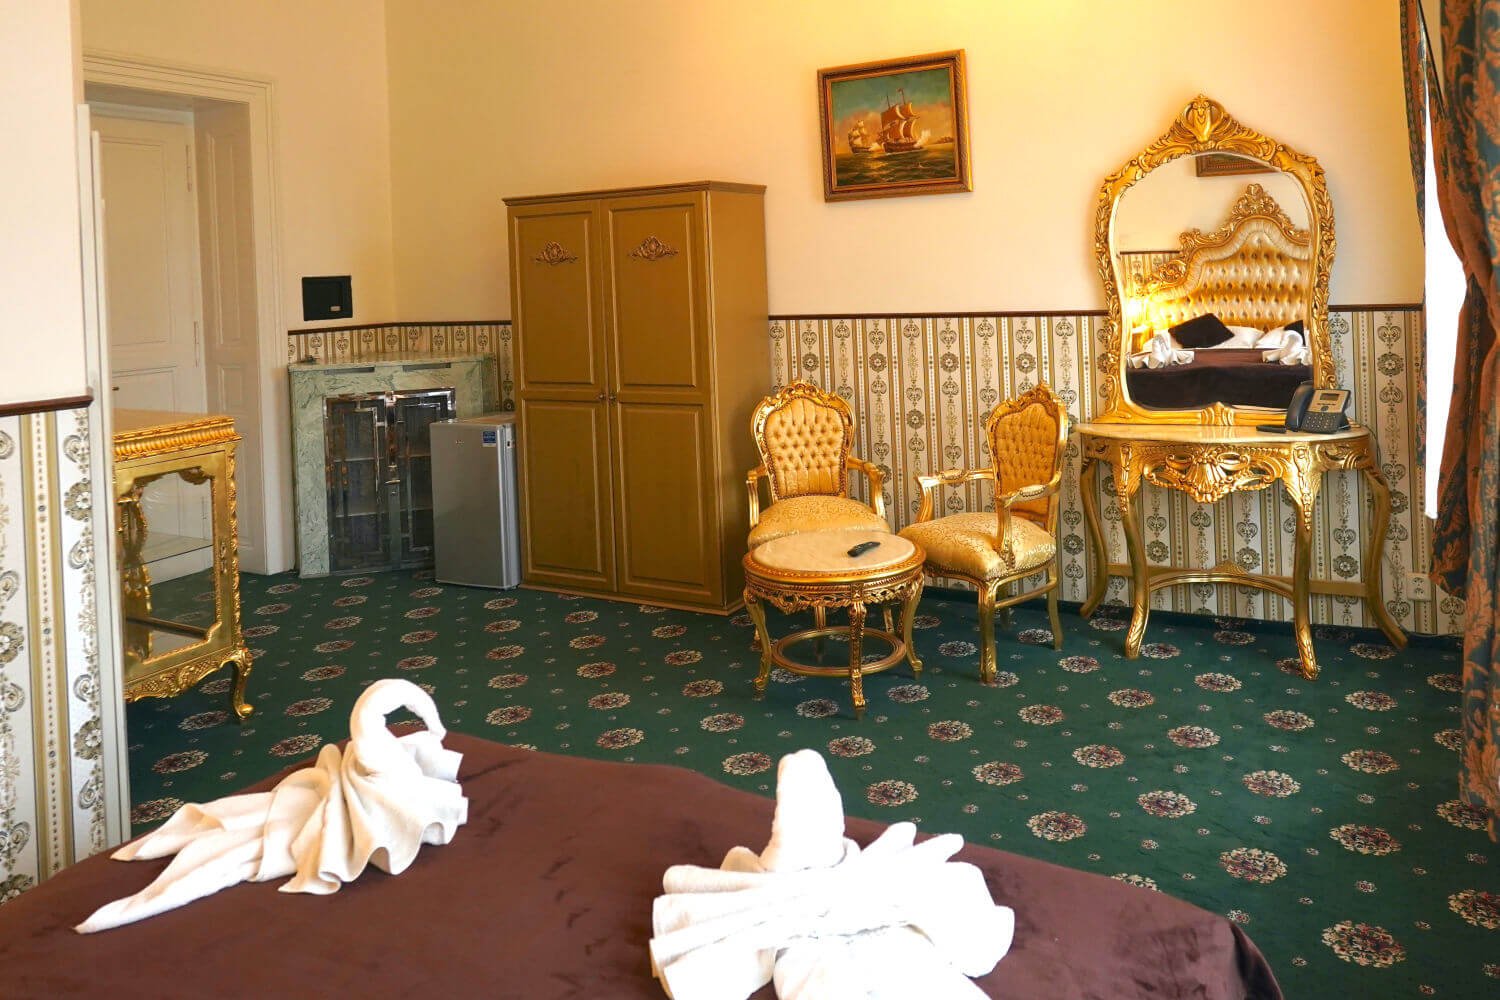 accommodation-deluxe-room4